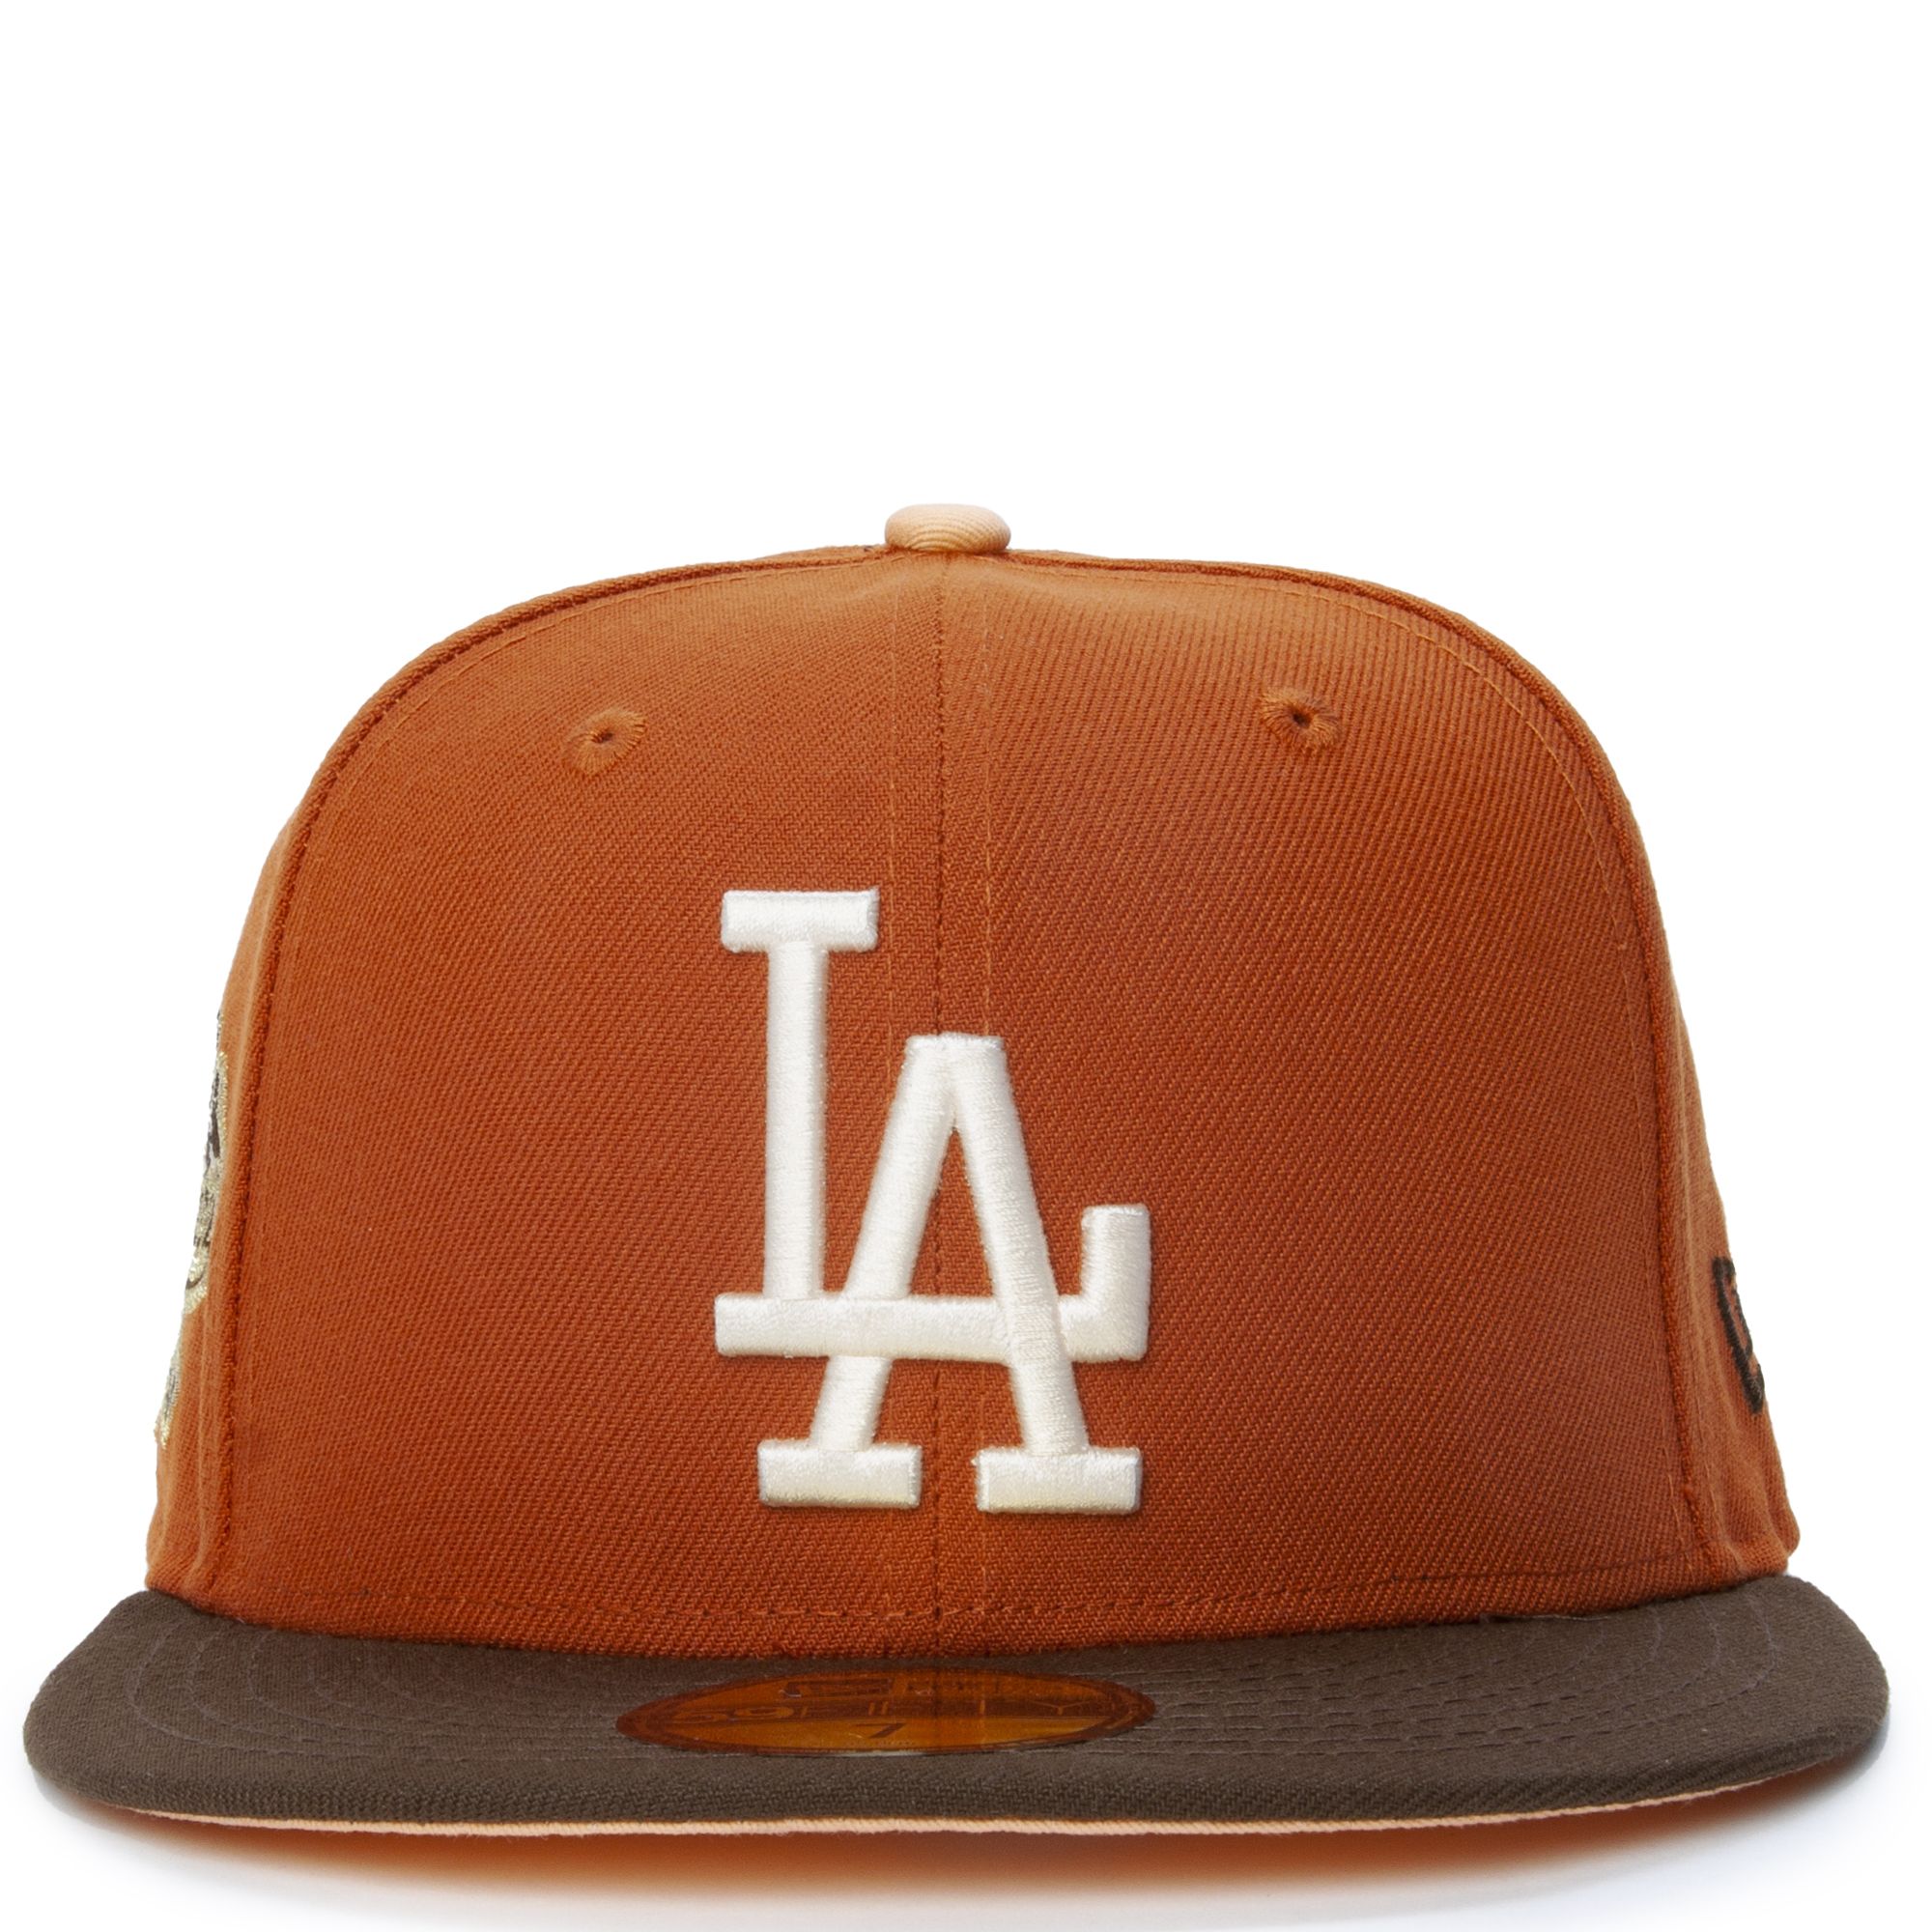 NEW ERA CAPS Los Angeles Dodgers 100th Years Anniversary 59FIFTY Cap ...